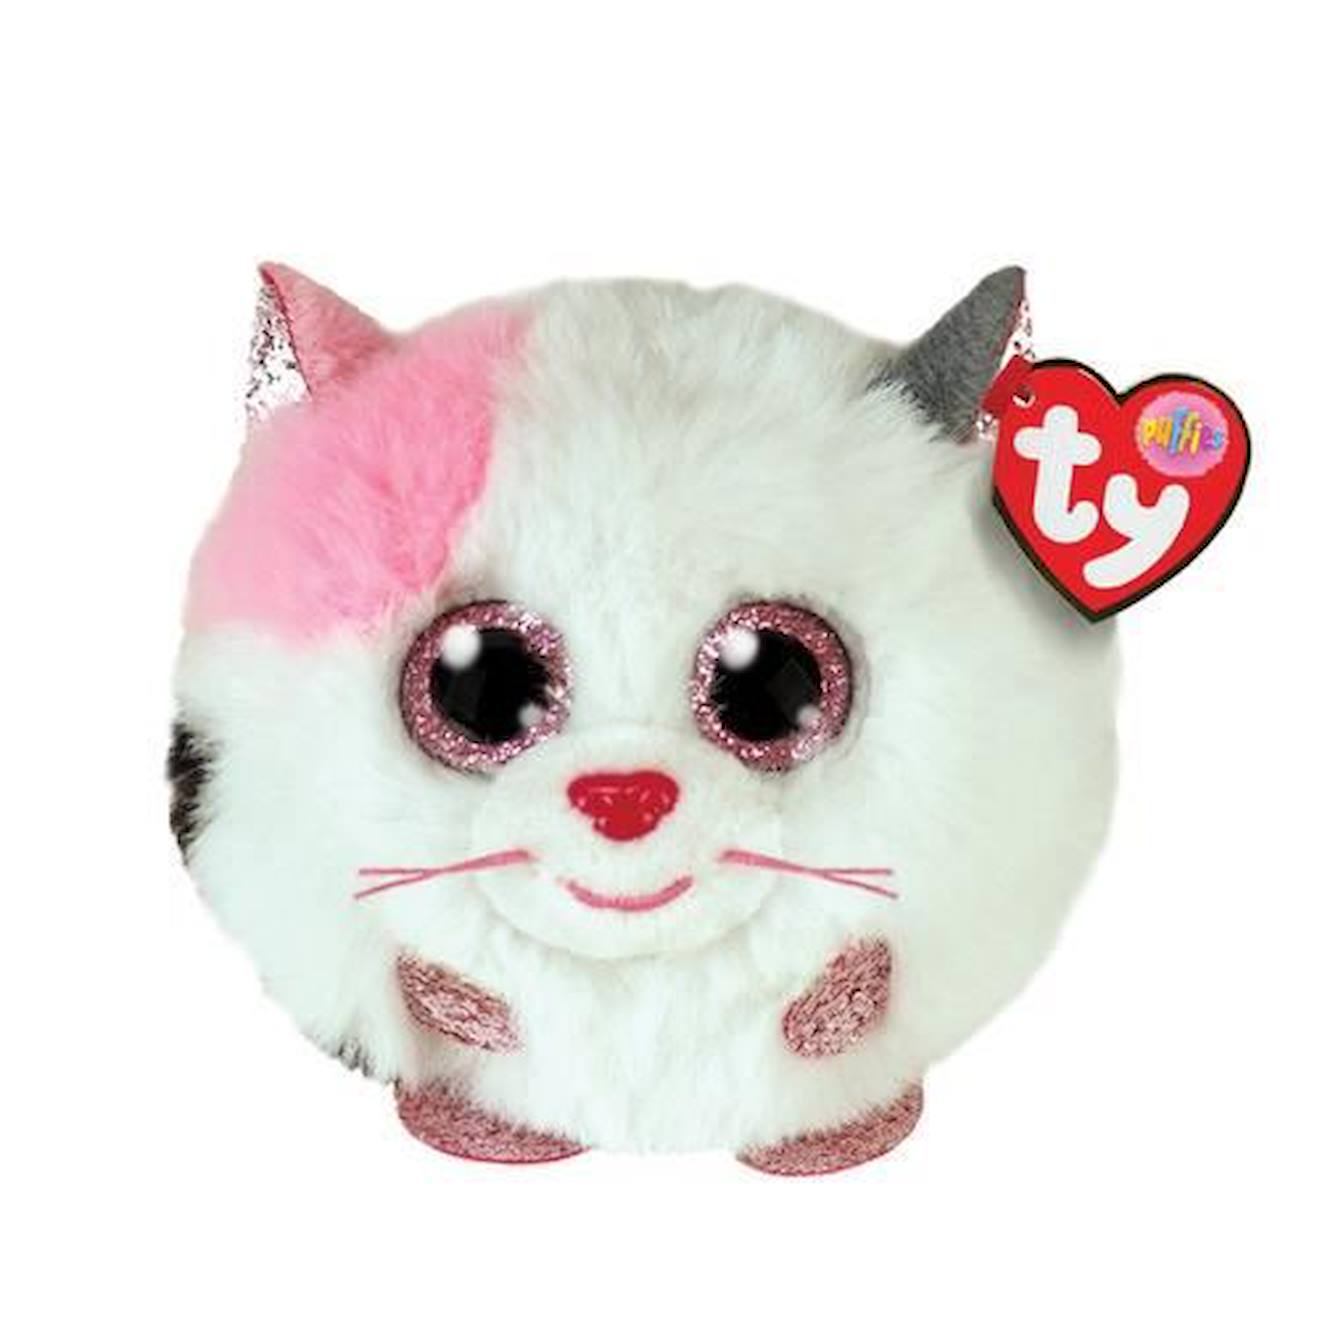 Peluche Ty Puffies - Muffin Le Chat - Blanc - Jaune - Mixte Blanc